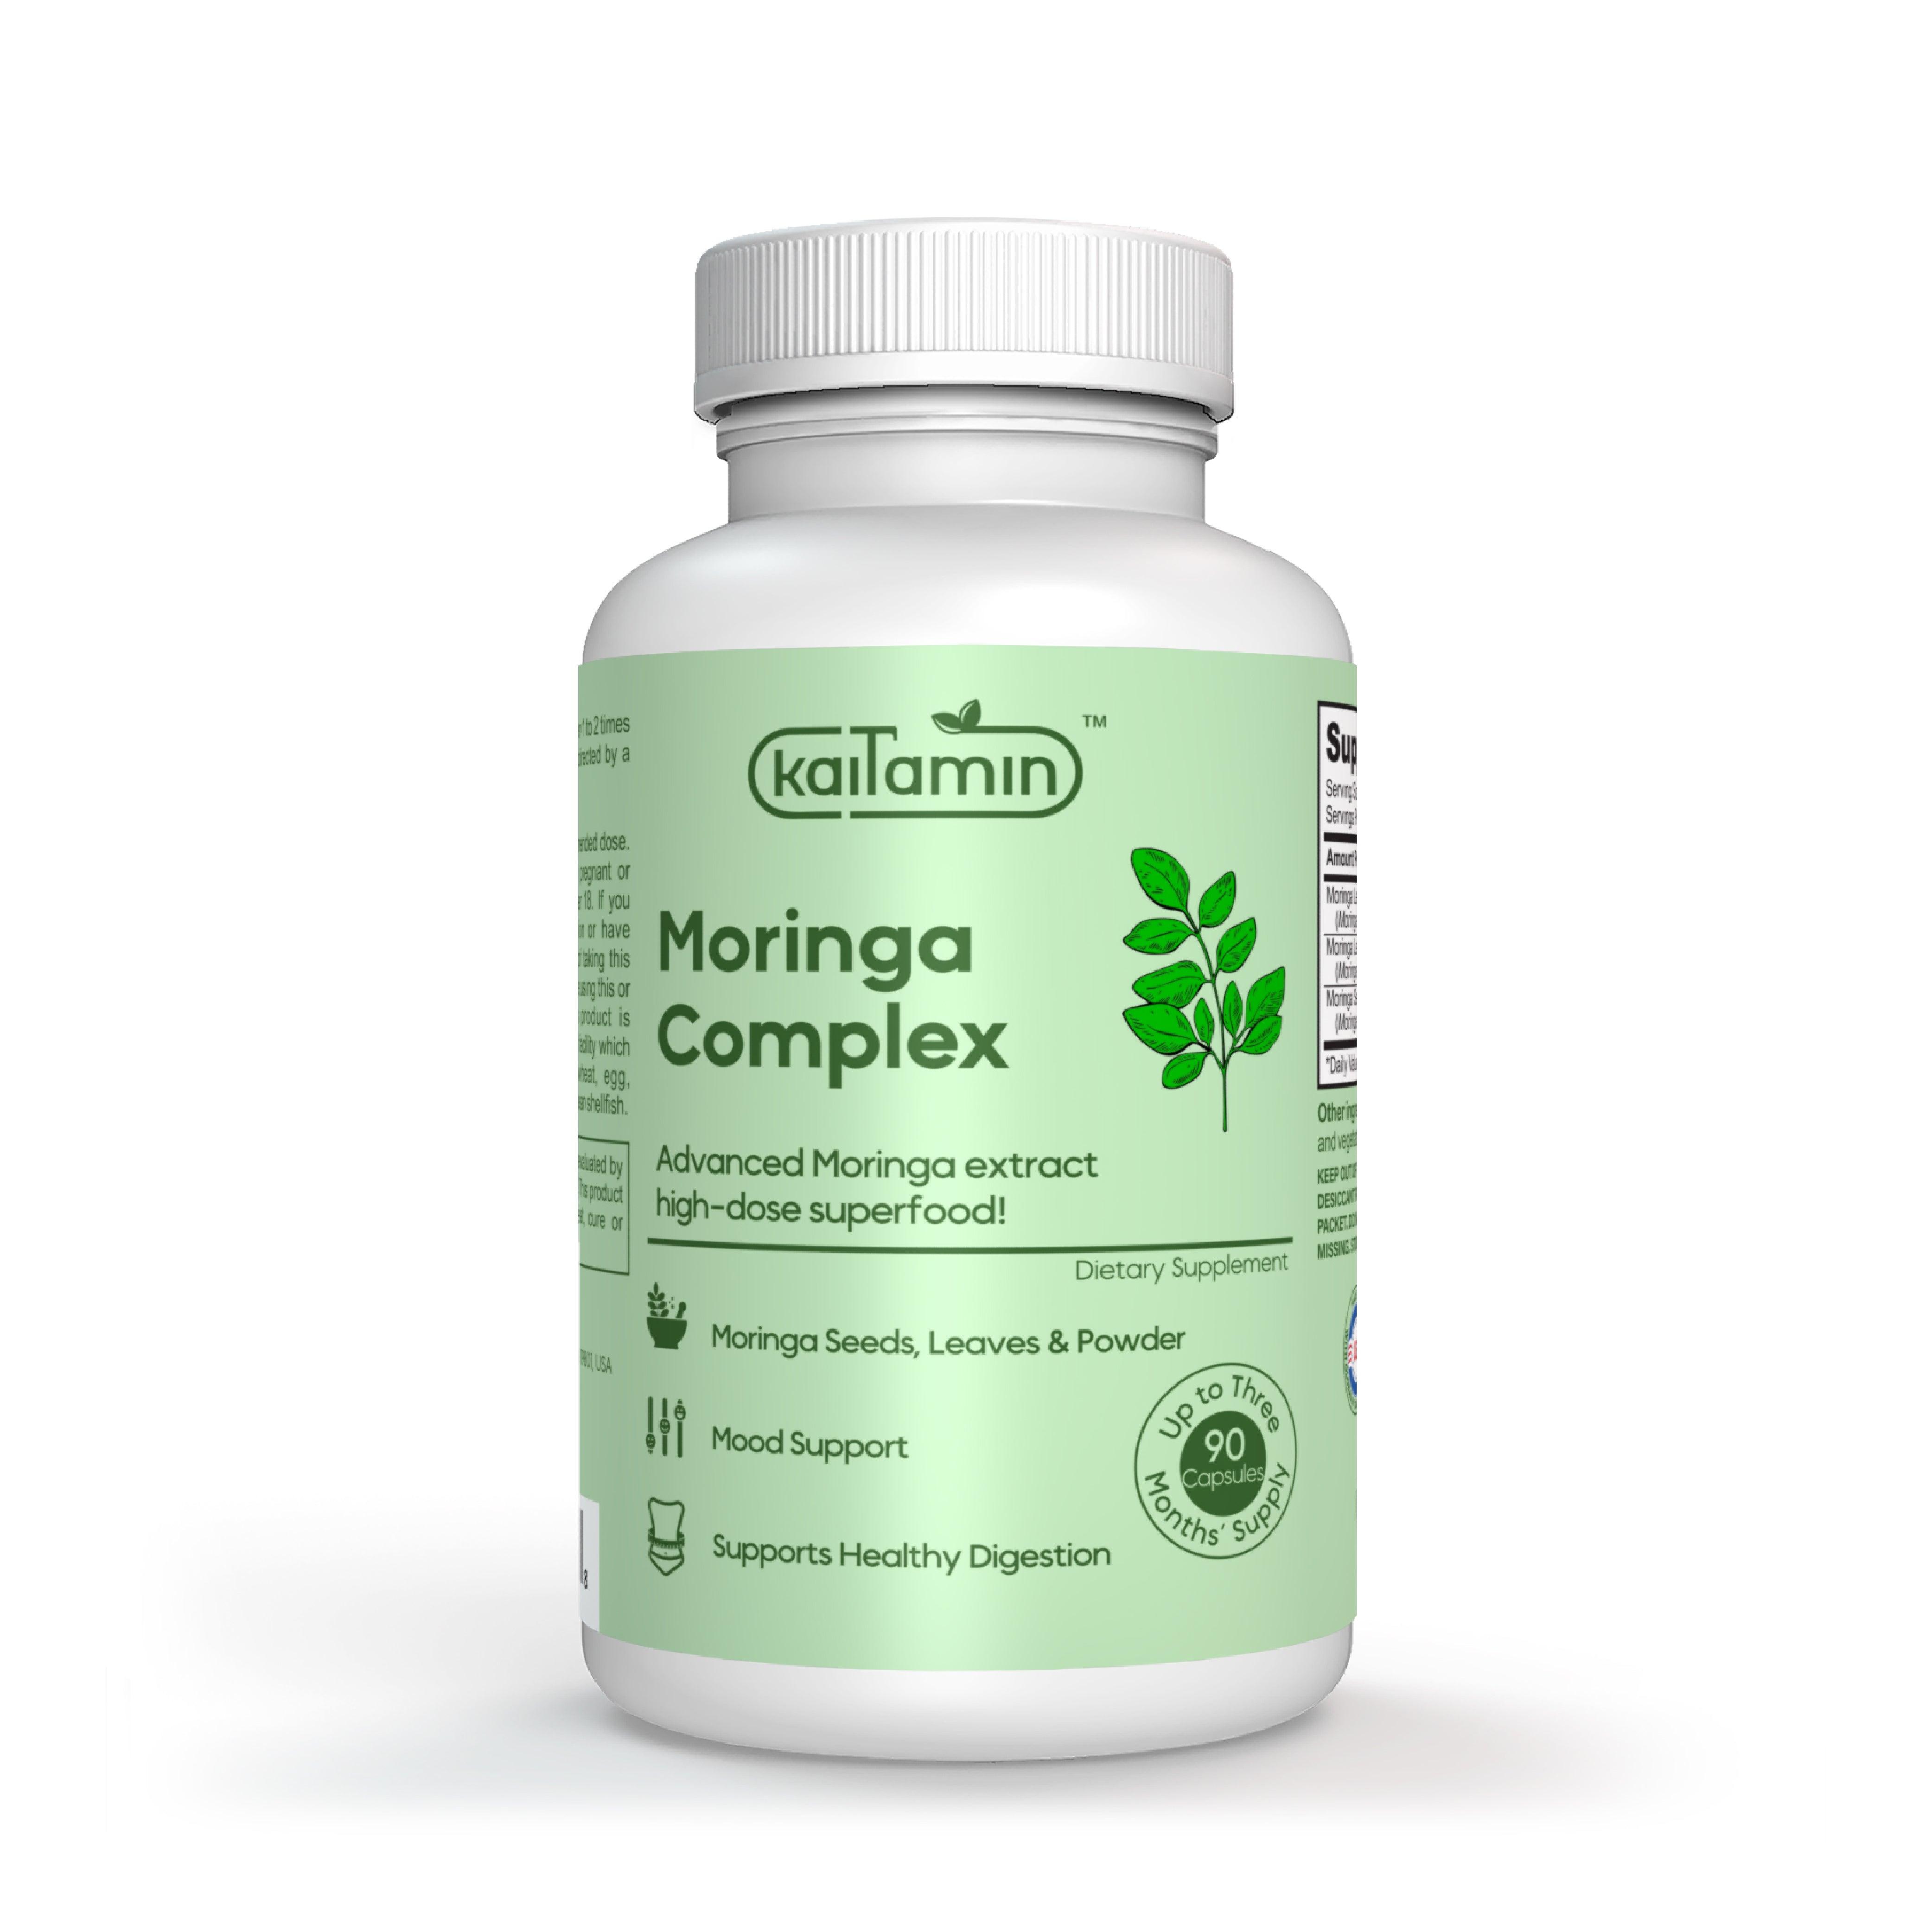 Moringa Complex - Natural Superfood for Digestion - 90 Capsules - Kaitamin